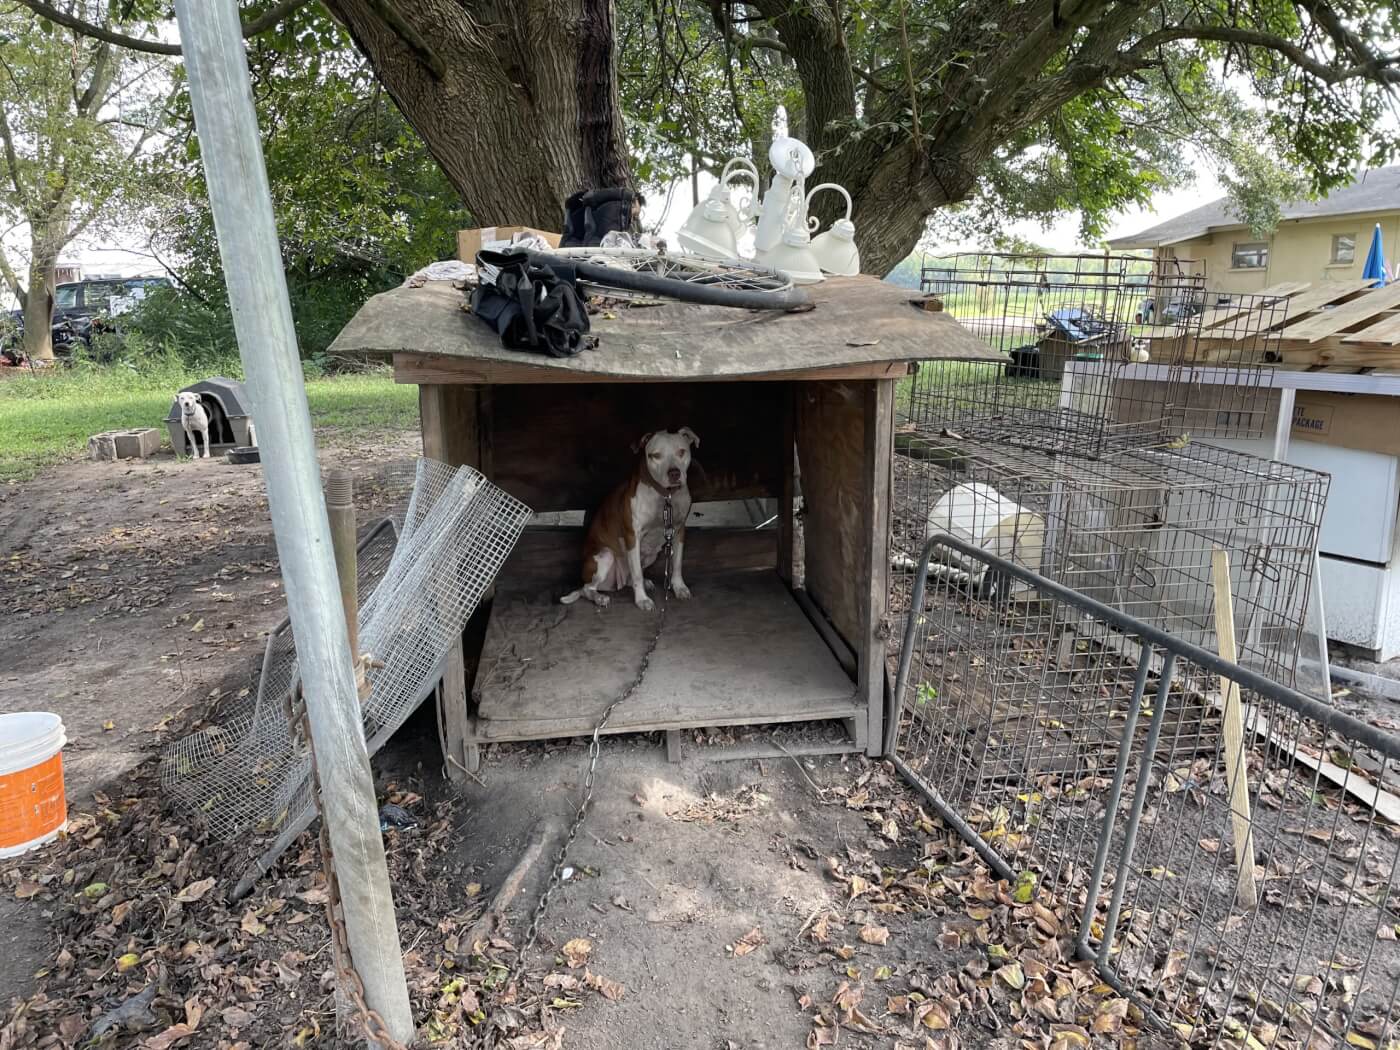 Bella, before.  A dog is chained to a post, inside a sagging dog kennel built of wooden planks.  Hazardous trash appears to be littered within a walking radius of the outer pole.